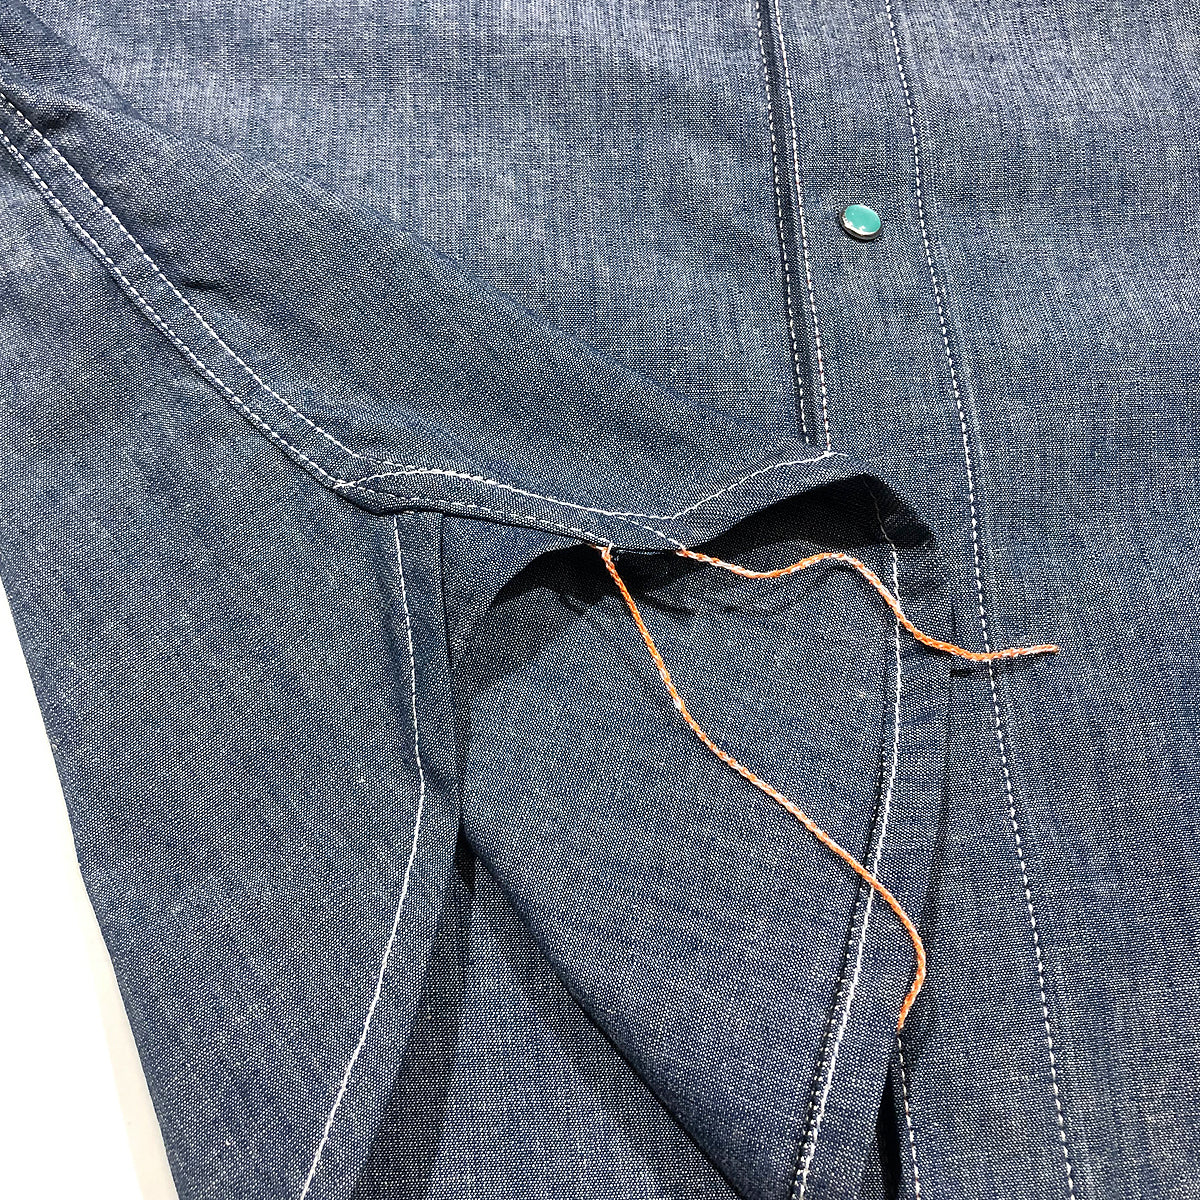 7oz Cone Mills Chambray Ranch Style "WORKSHIRT"